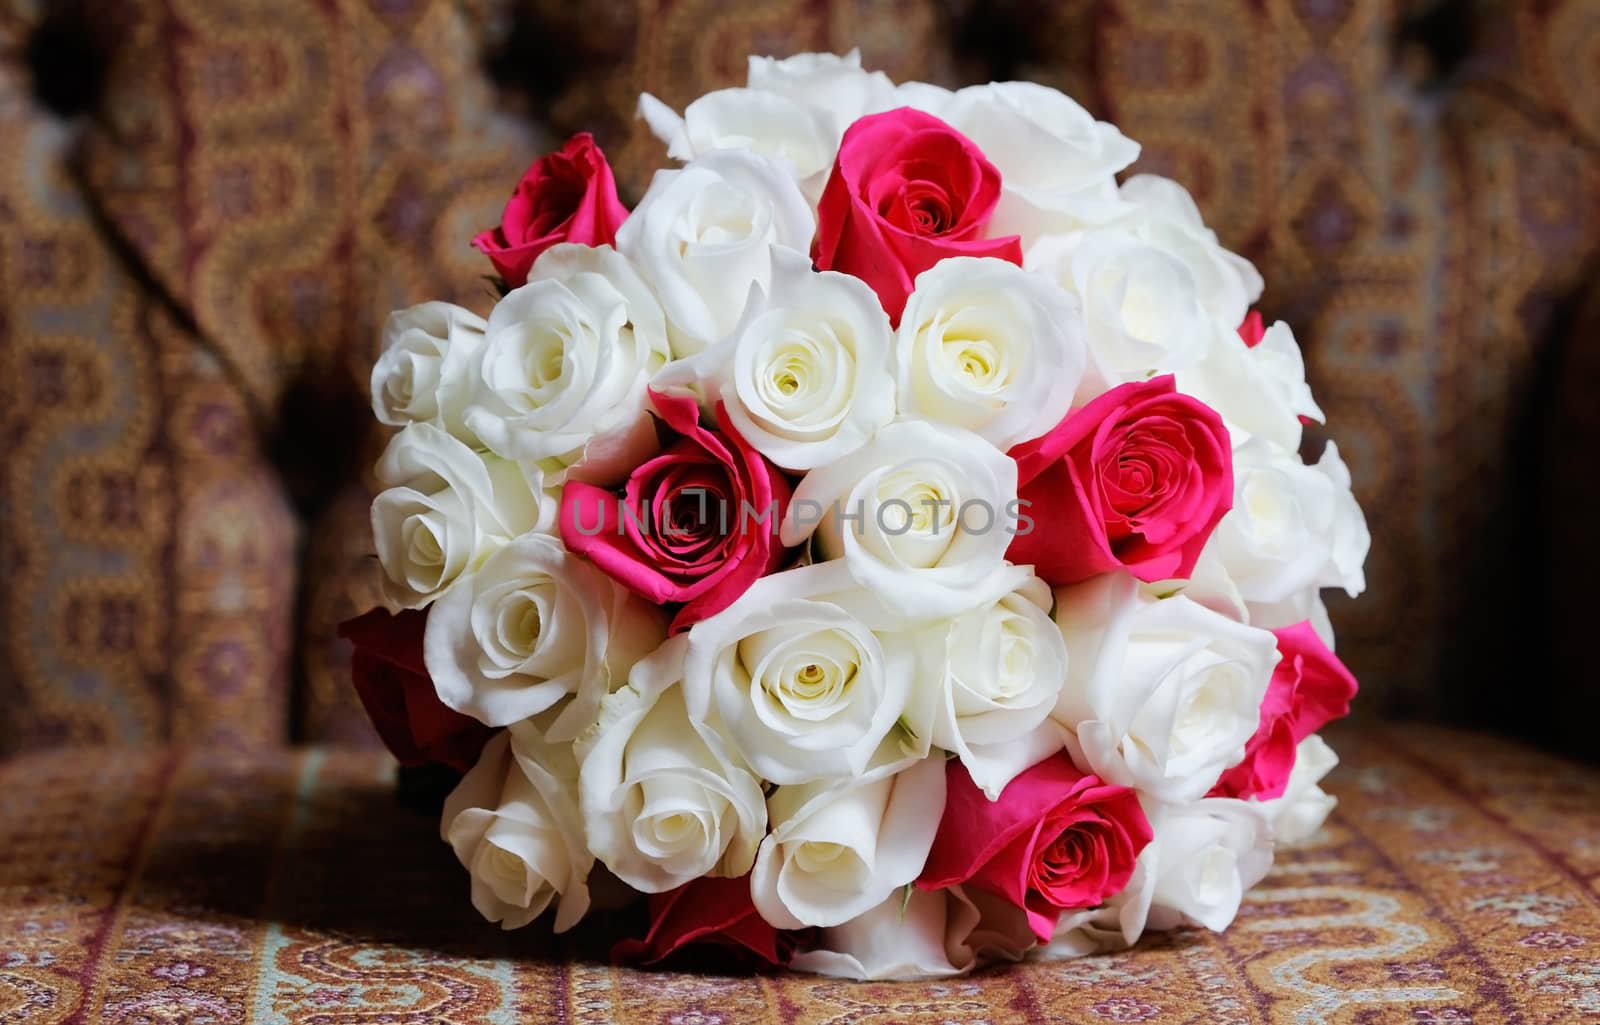 Brides roses by kmwphotography